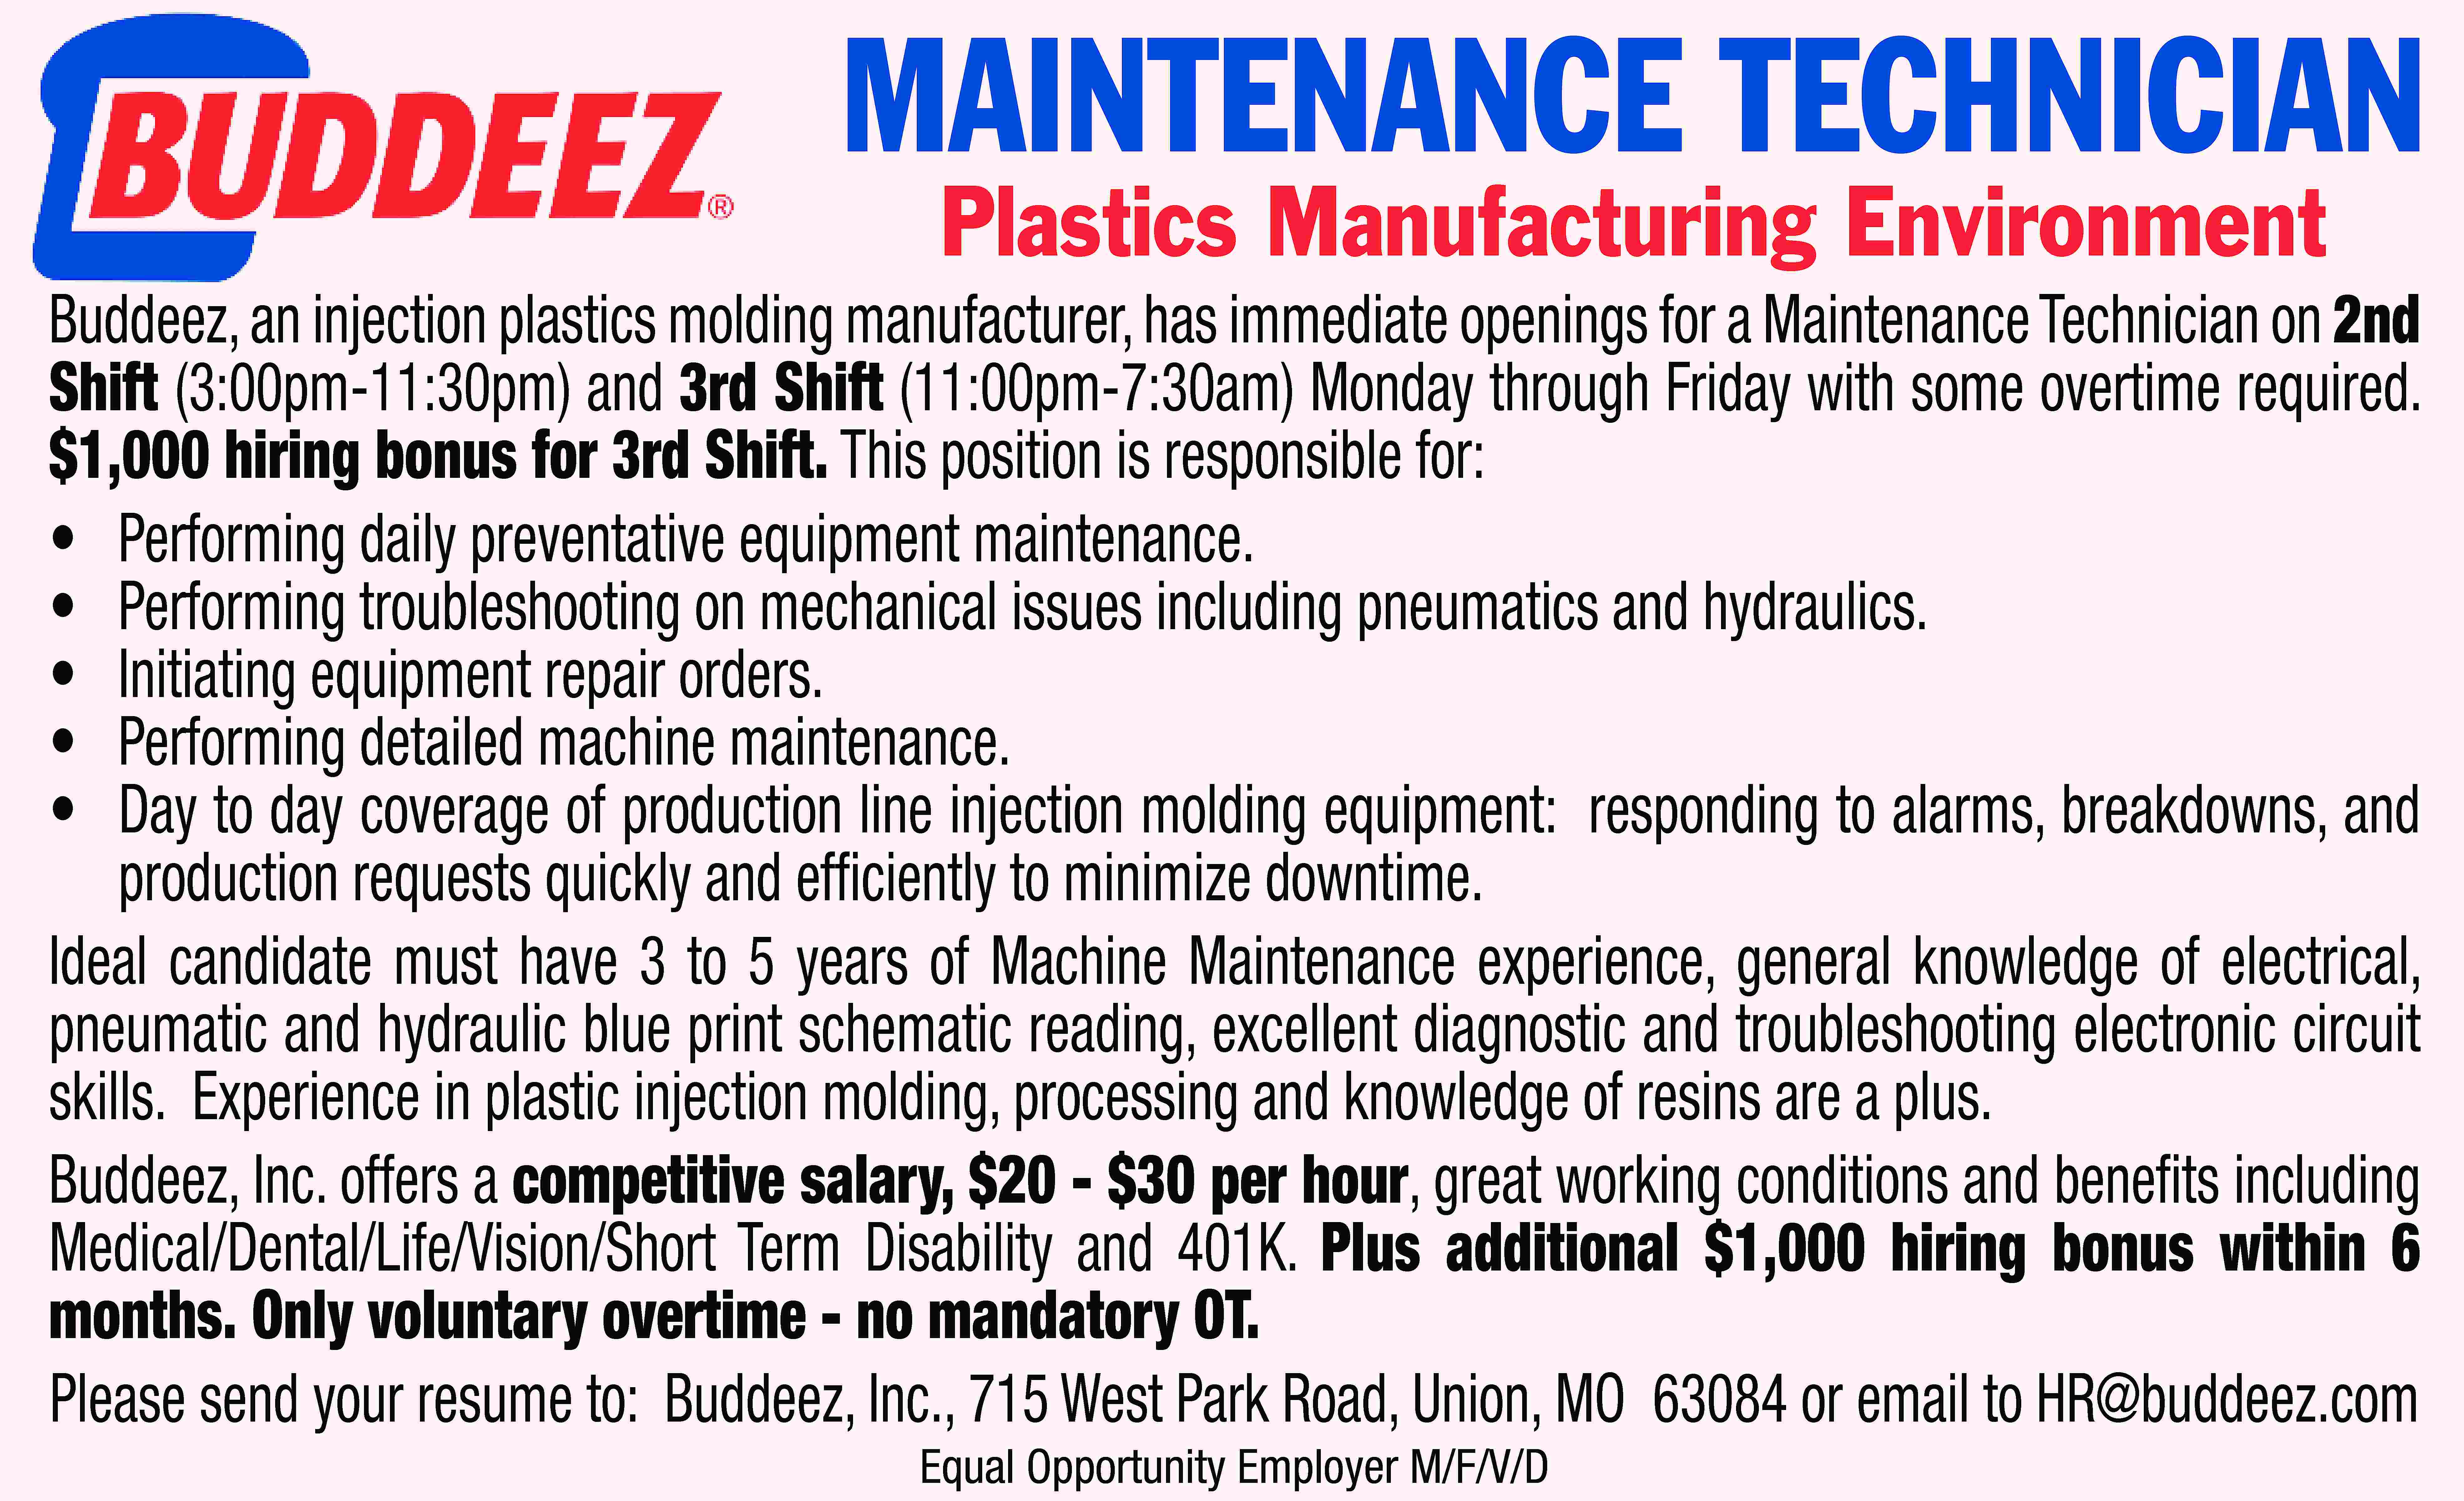 MAINTENANCE TECHNICIAN Plastics Manufacturing Environment  MAINTENANCE TECHNICIAN Plastics Manufacturing Environment Buddeez, an injection plastics molding manufacturer, has immediate openings for a Maintenance Technician on 2nd Shift (3:00pm-11:30pm) and 3rd Shift (11:00pm-7:30am) Monday through Friday with some overtime required. $1,000 hiring bonus for 3rd Shift. This position is responsible for: • Performing daily preventative equipment maintenance. • Performing troubleshooting on mechanical issues including pneumatics and hydraulics. • Initiating equipment repair orders. • Performing detailed machine maintenance. • Day to day coverage of production line injection molding equipment: responding to alarms, breakdowns, and production requests quickly and efficiently to minimize downtime. Ideal candidate must have 3 to 5 years of Machine Maintenance experience, general knowledge of electrical, pneumatic and hydraulic blue print schematic reading, excellent diagnostic and troubleshooting electronic circuit skills. Experience in plastic injection molding, processing and knowledge of resins are a plus. Buddeez, Inc. offers a competitive salary, $20 - $30 per hour, great working conditions and benefits including Medical/Dental/Life/Vision/Short Term Disability and 401K. Plus additional $1,000 hiring bonus within 6 months. Only voluntary overtime - no mandatory OT. Please send your resume to: Buddeez, Inc., 715 West Park Road, Union, MO 63084 or email to HR@buddeez.com Equal Opportunity Employer M/F/V/D